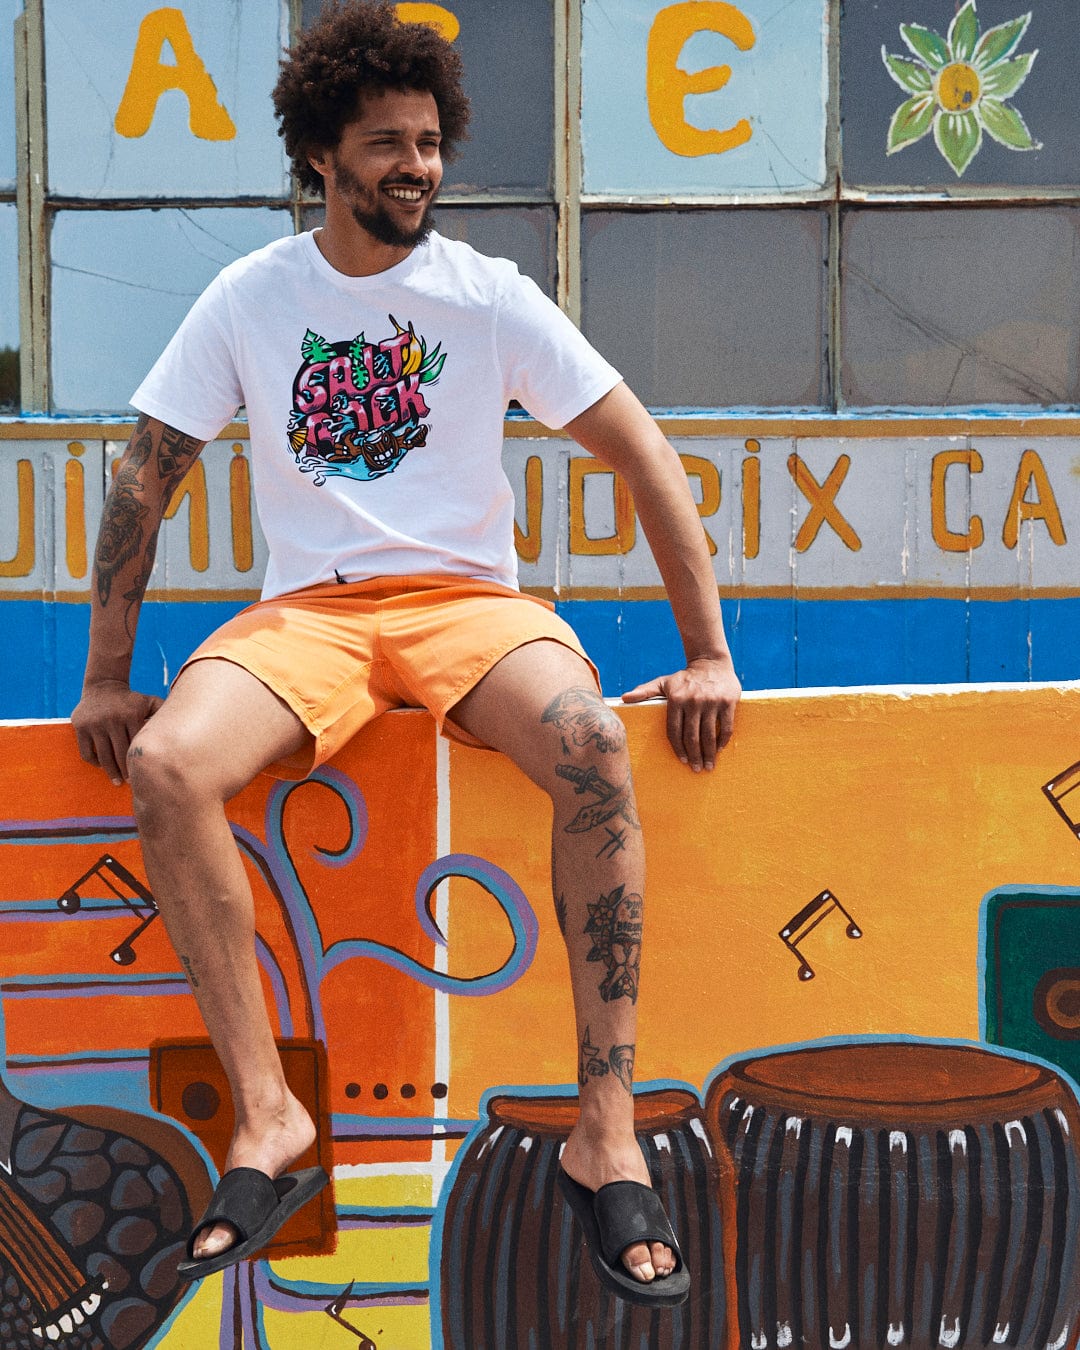 A man with tattoos, wearing a 100% cotton, illustrated white Tahiti - Mens Short Sleeve T-Shirt - White by Saltrock and orange shorts, sits on a colorful wall mural. He appears to be smiling, looking slightly left.